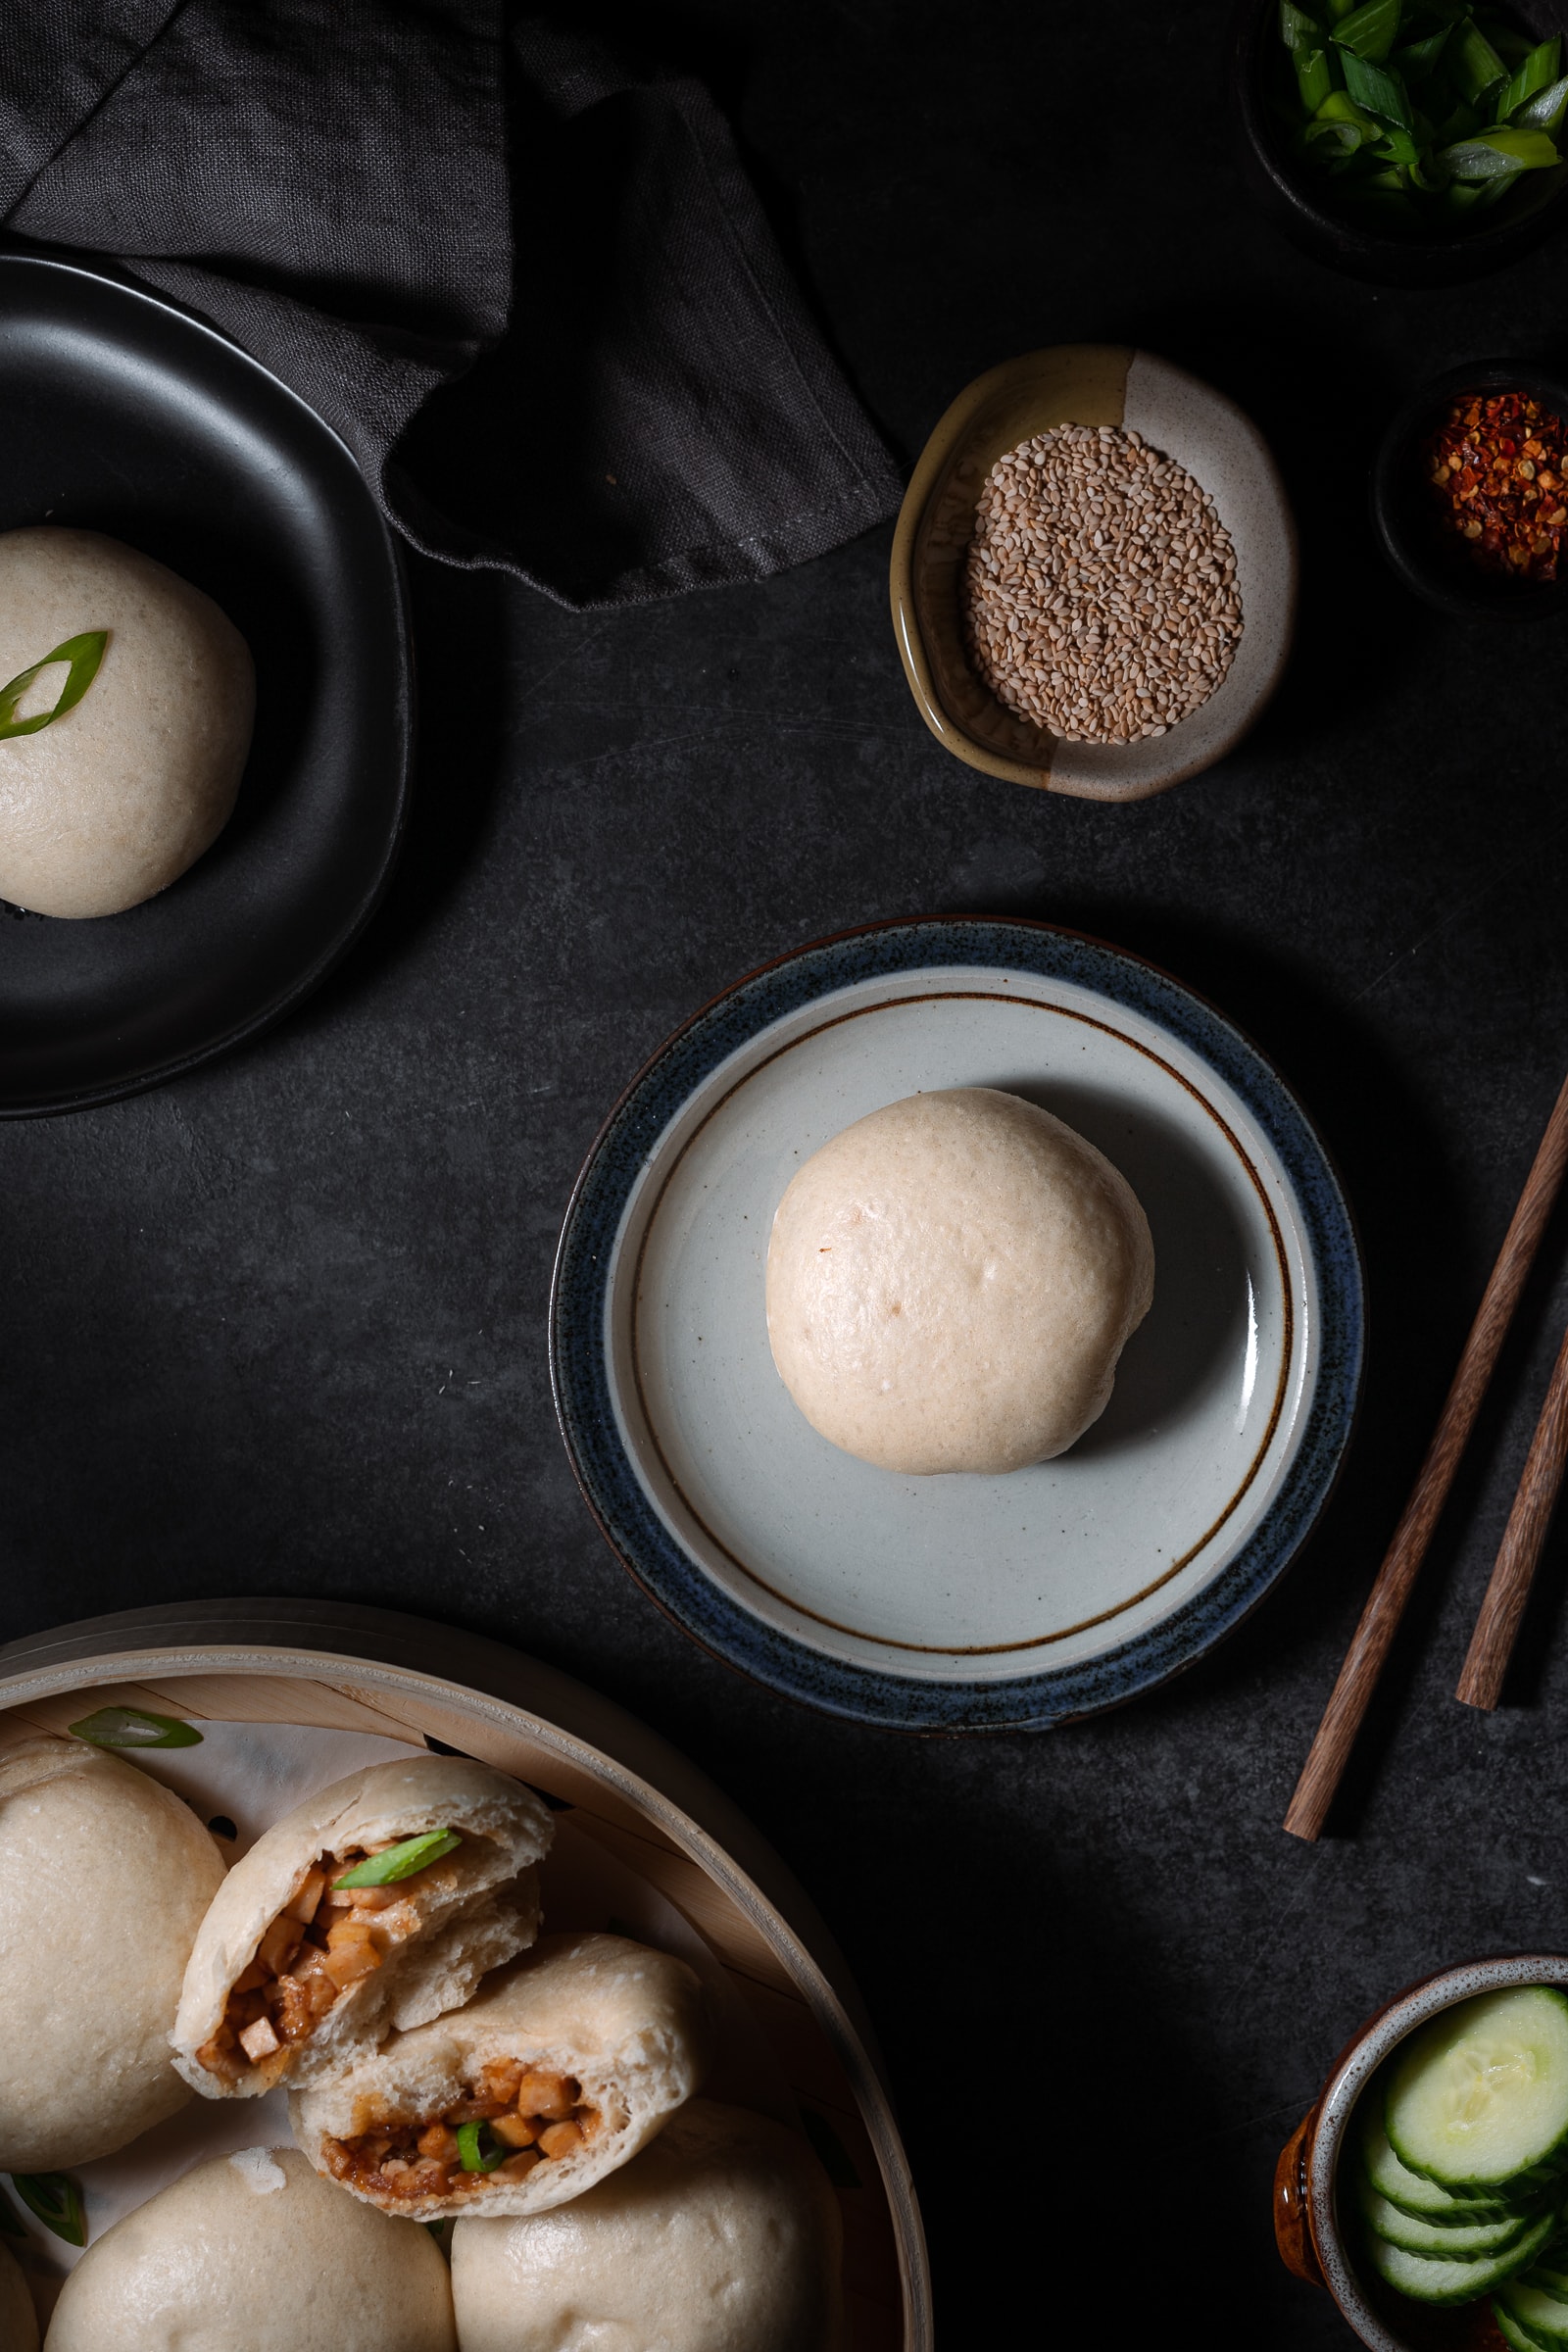 1 single steamed bun on a serving plate.